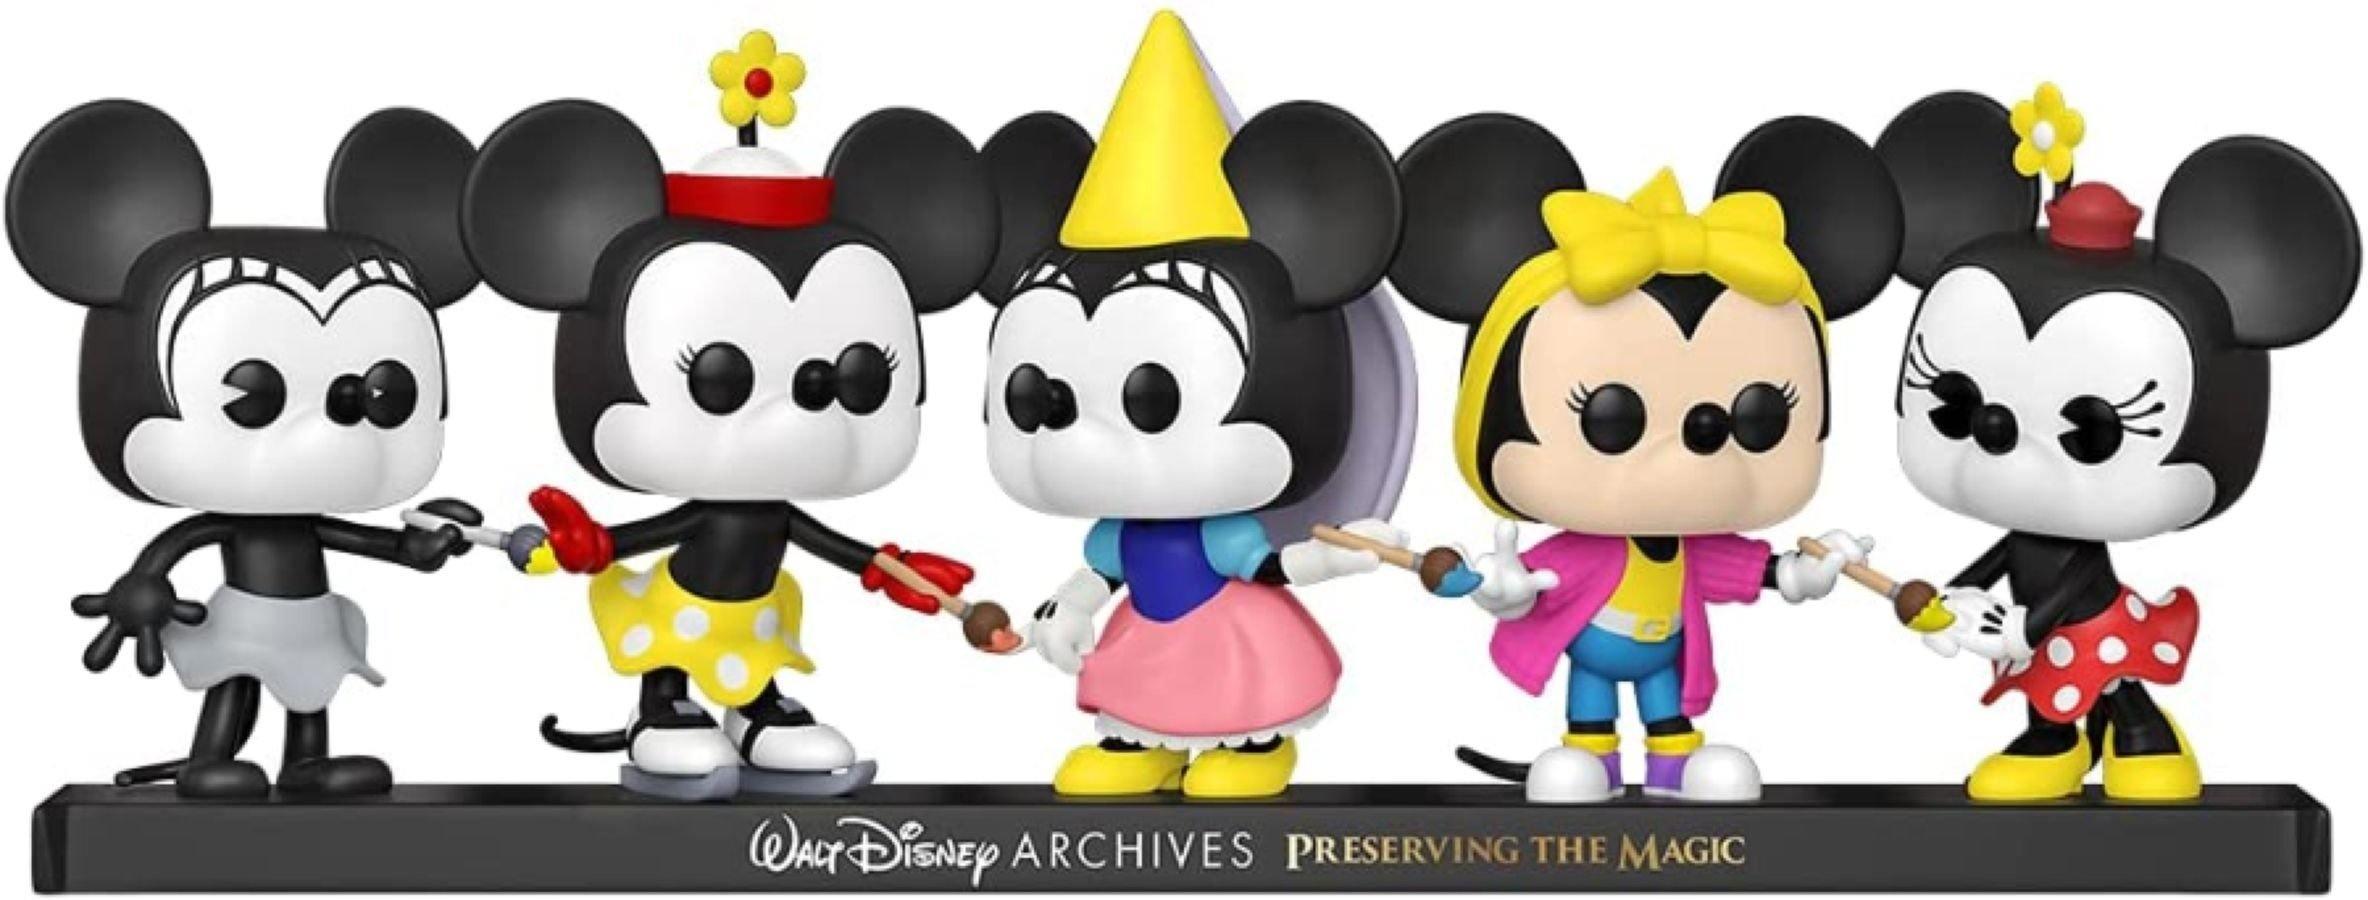 FUN58084 Mickey Mouse - Minnie Mouse US Exclusive Pop! Vinyl 5-Pack [RS] - Funko - Titan Pop Culture